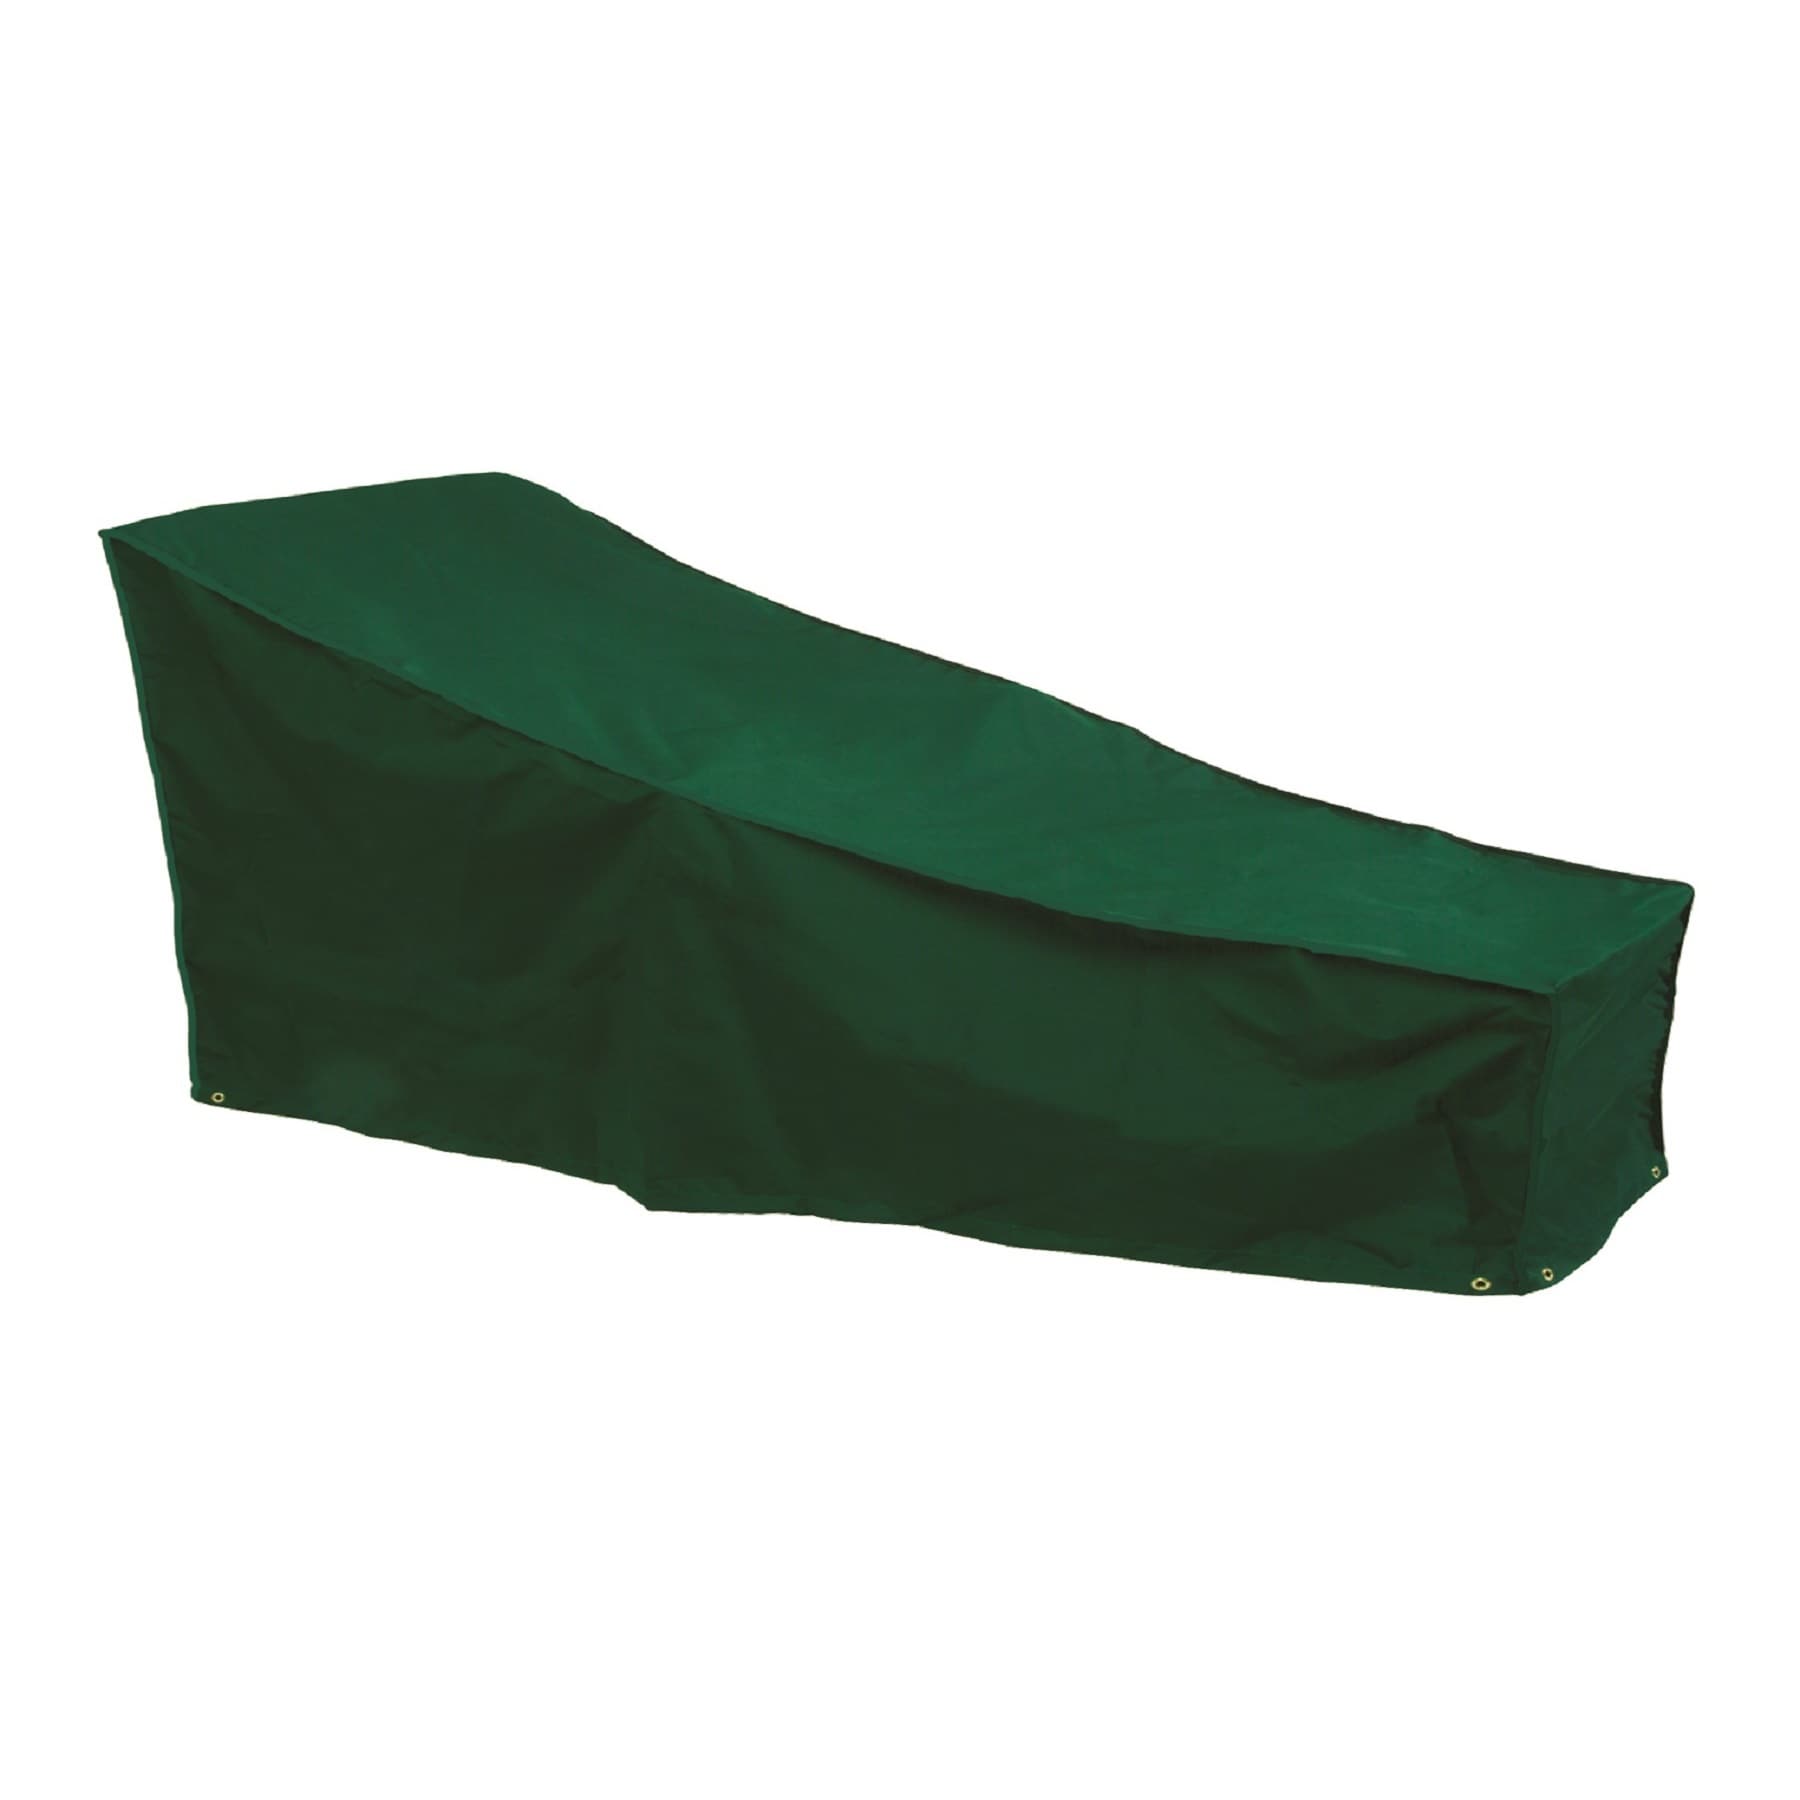 Bosmere C567 Chaise / Steamer Chair Cover - 59 x 24 in. - Green - image 2 of 4